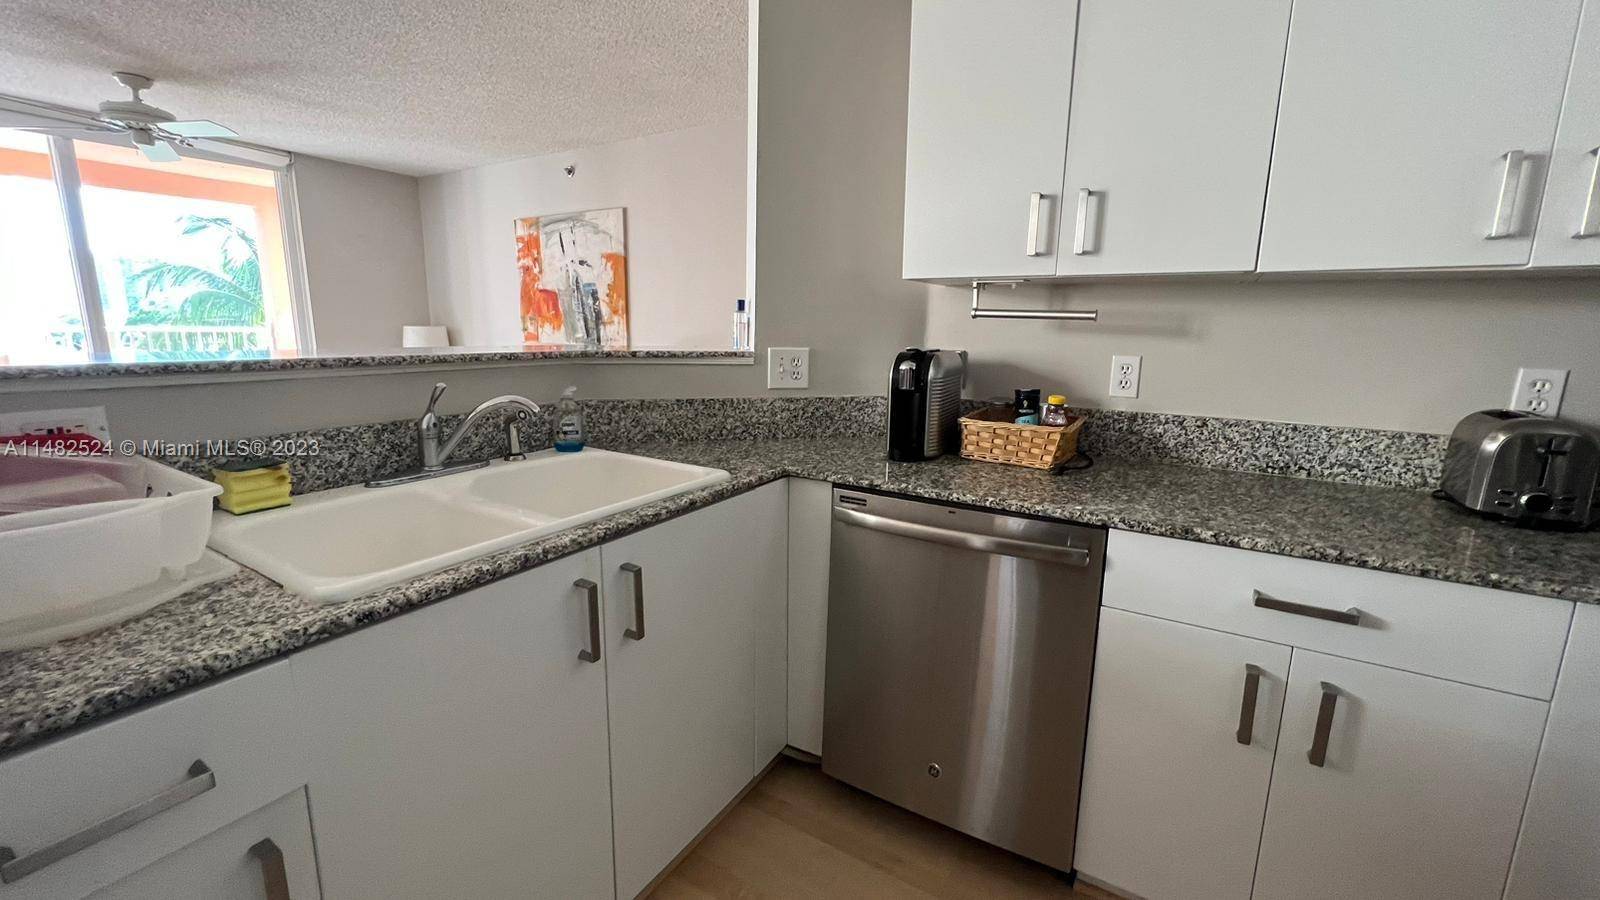 SHORT TERM OK call for details Fully furnished Pool view 1 1 in heart of Aventura, wood floors, private balcony, full size washer dryer, and super clean.